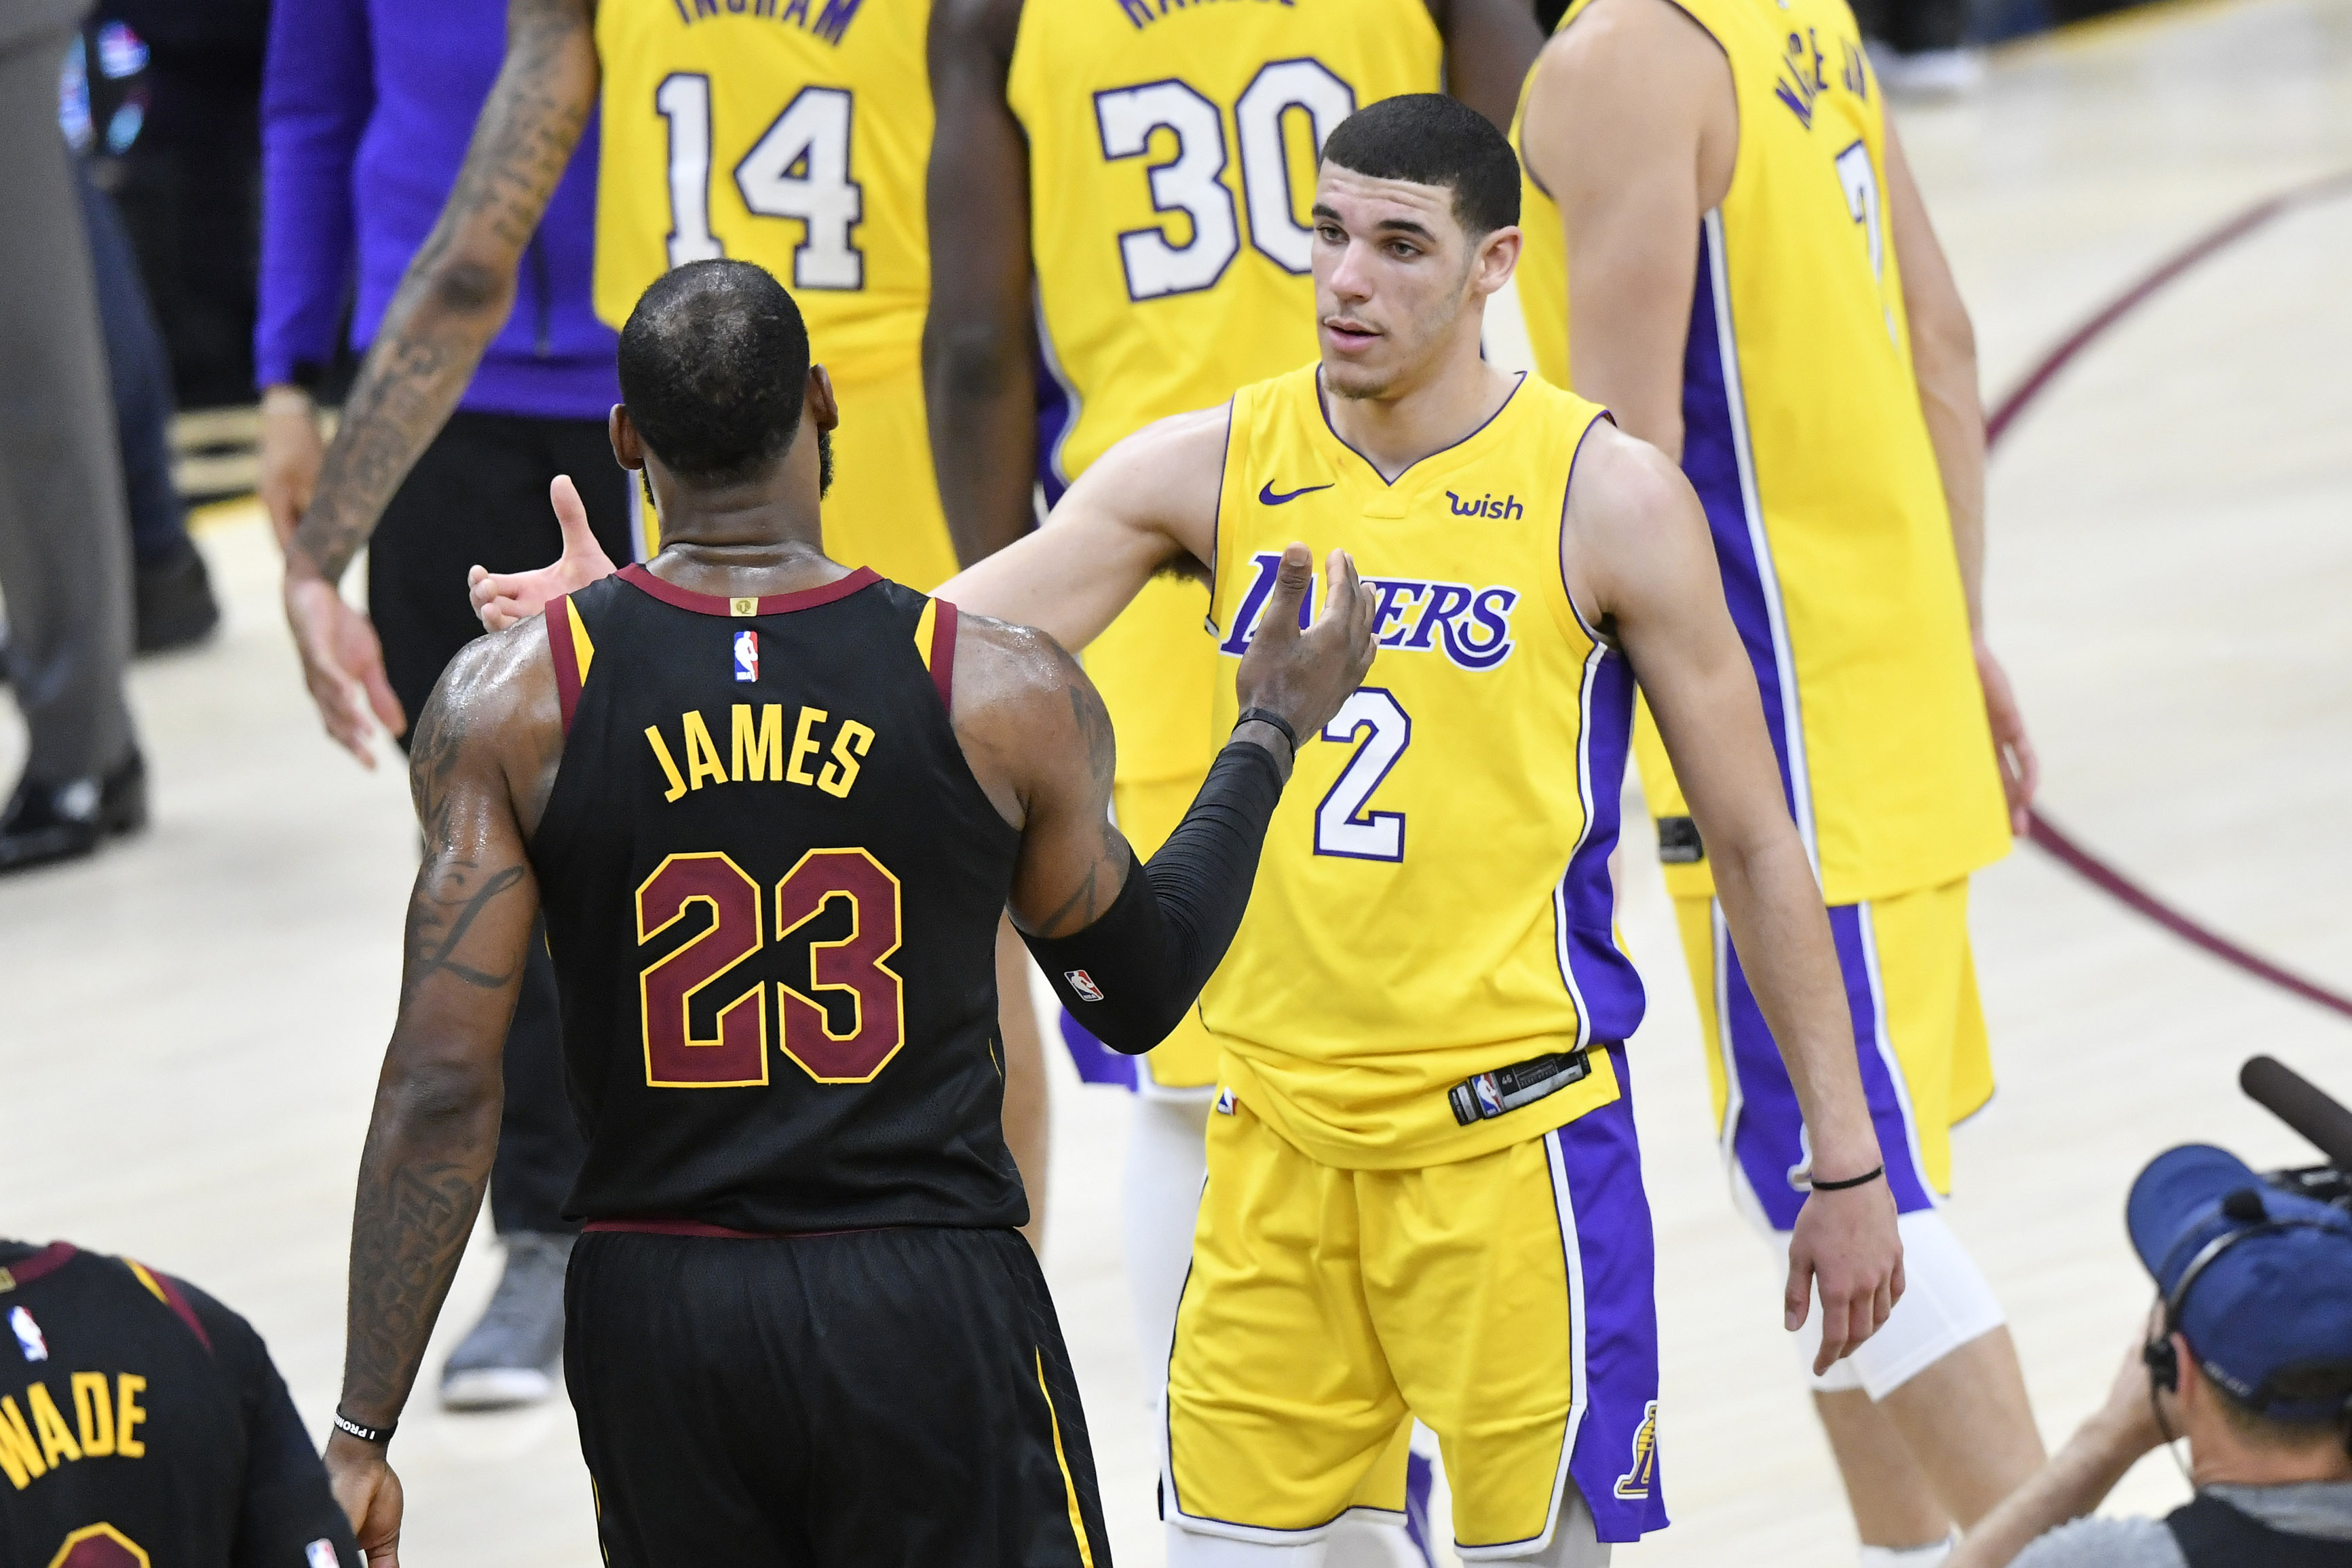 Lakers top NBA jersey sales, Lonzo Ball falls out of top 15